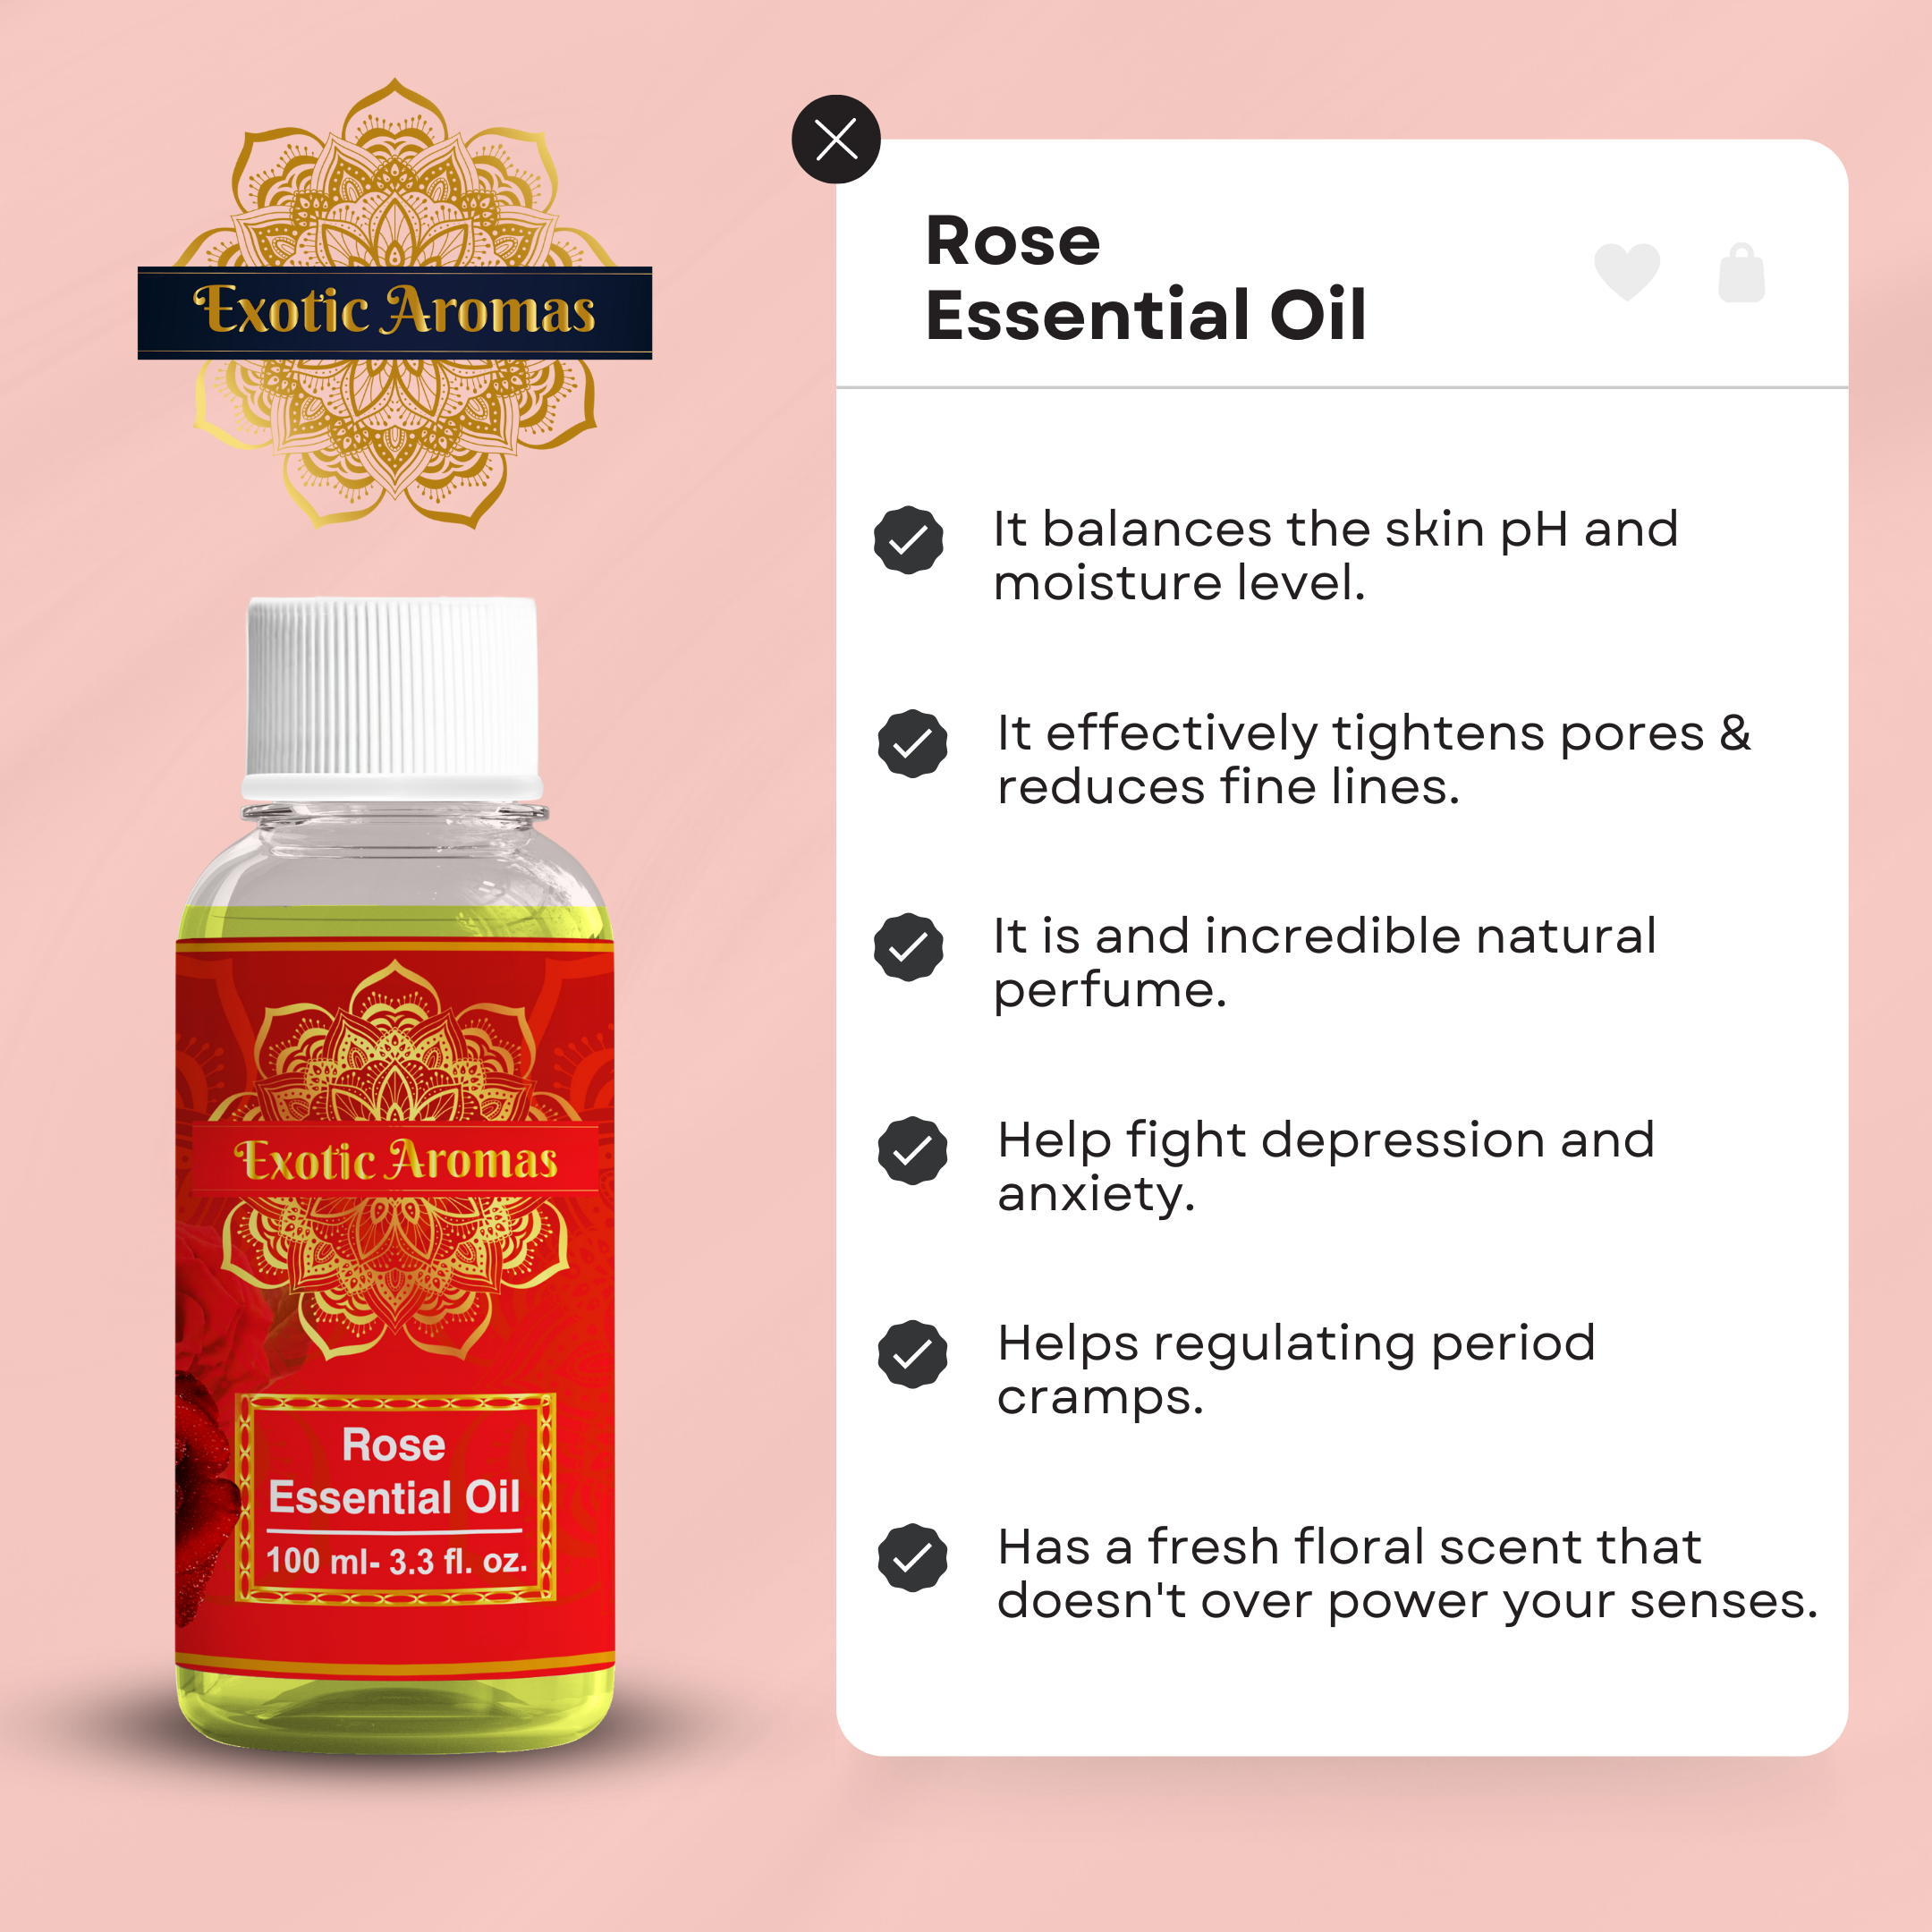 Rose essential oil, Pure, Natural and Organic